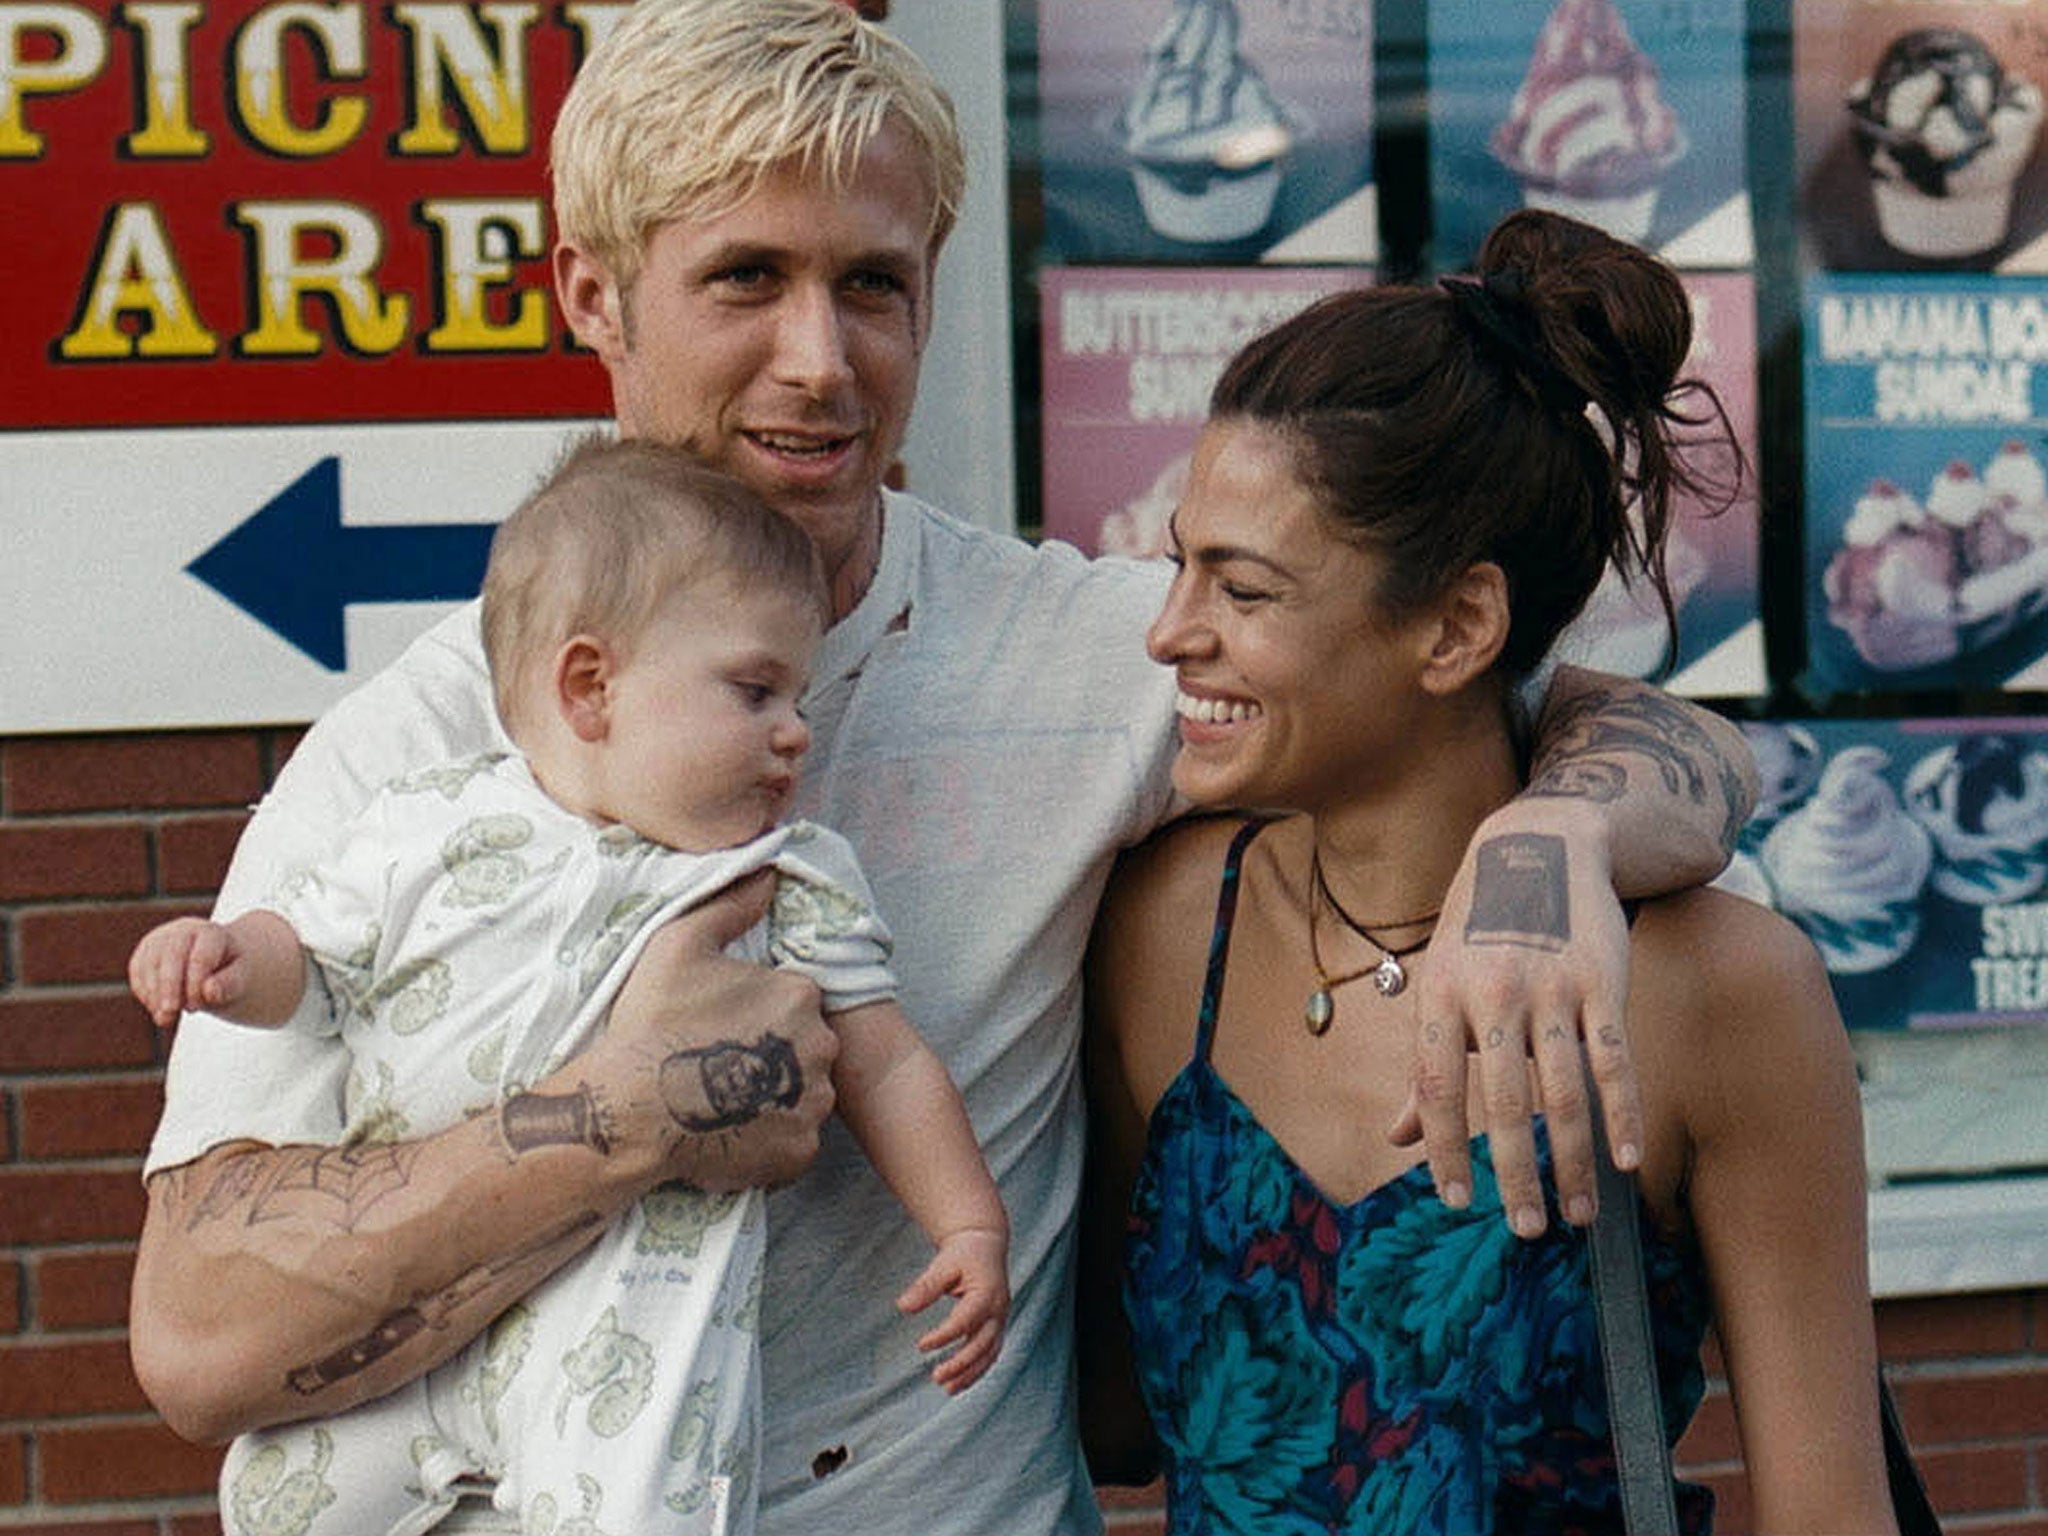 Bringing up baby: Ryan Gosling and Eva Mendes in 'The Place Beyond the Pines'